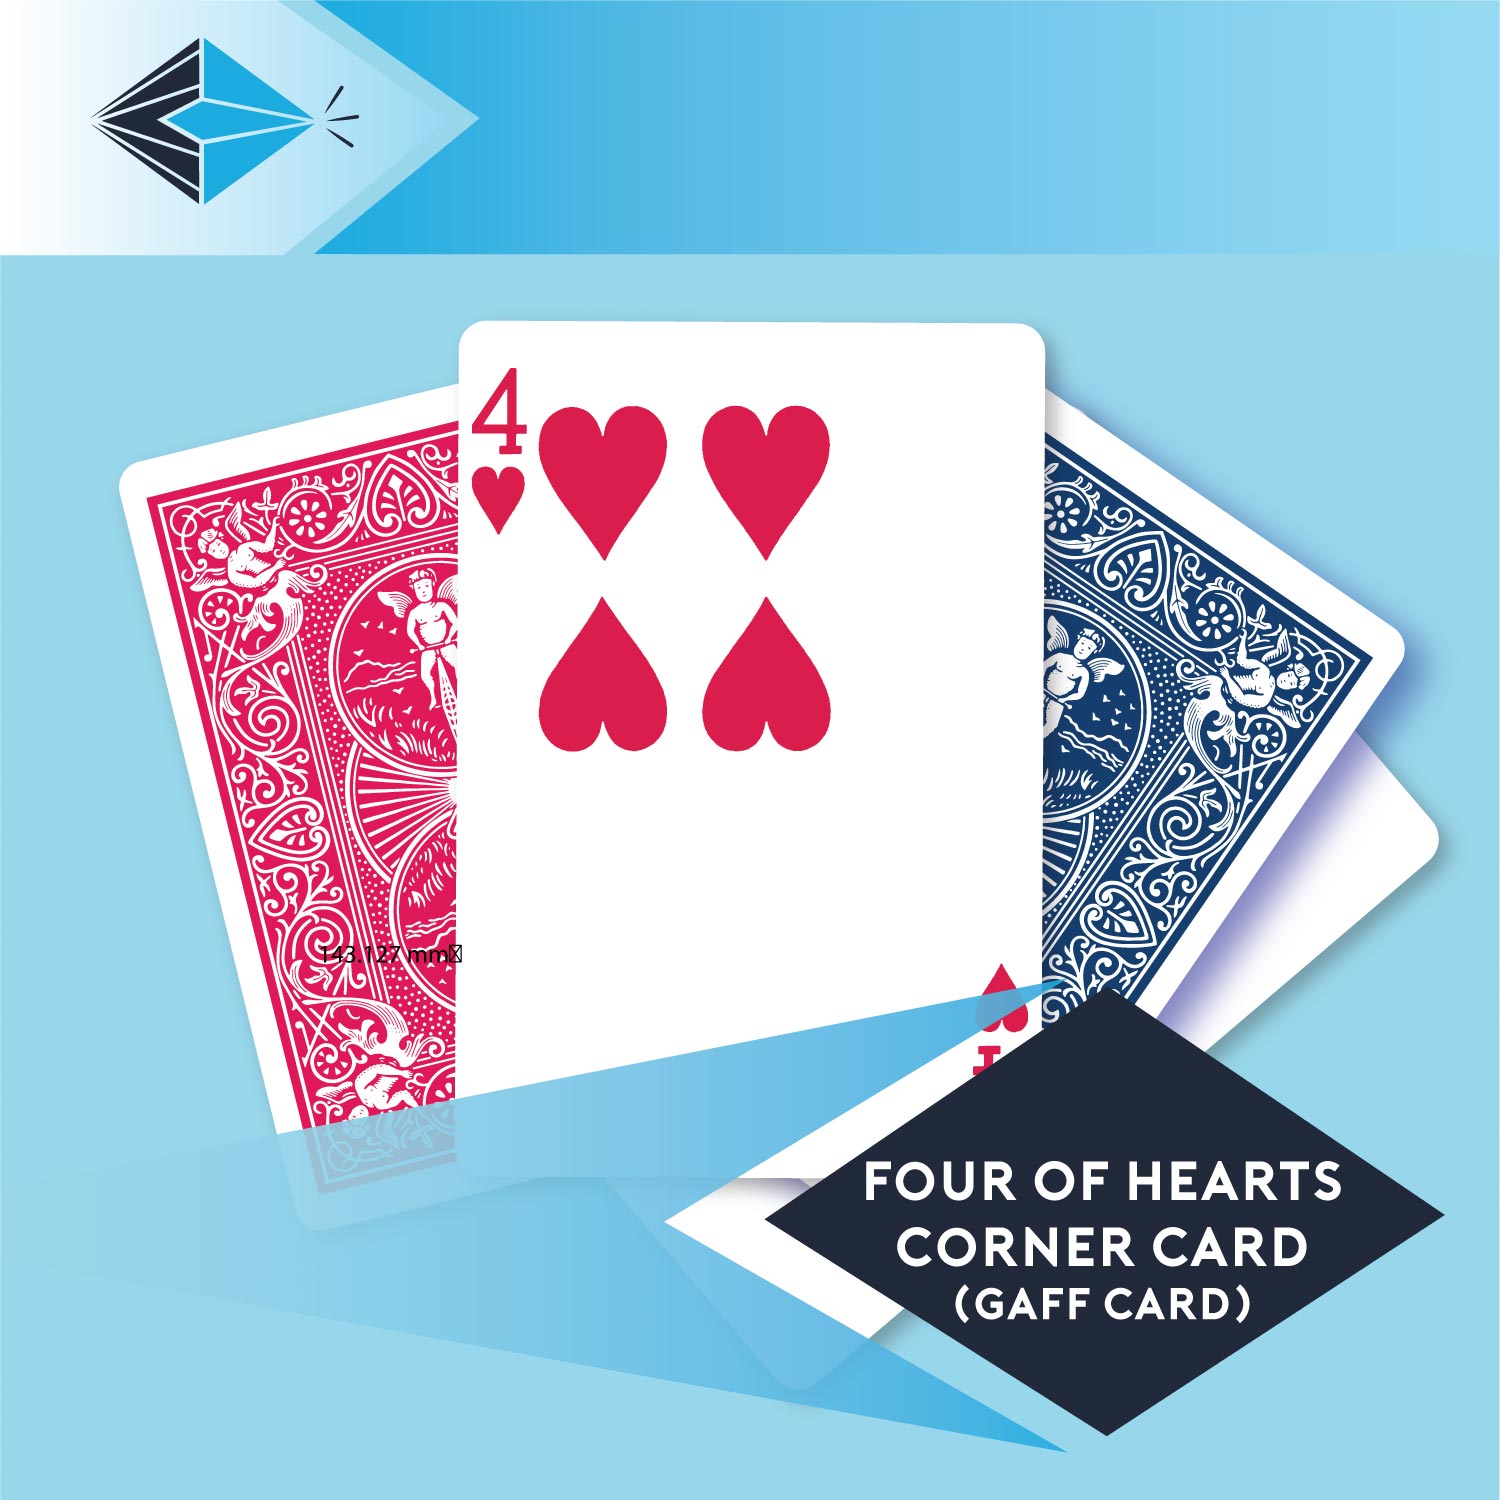 four of hearts corner card gaff card 6 printbymagic magicians gaff cards printers Stockport Manchester UK